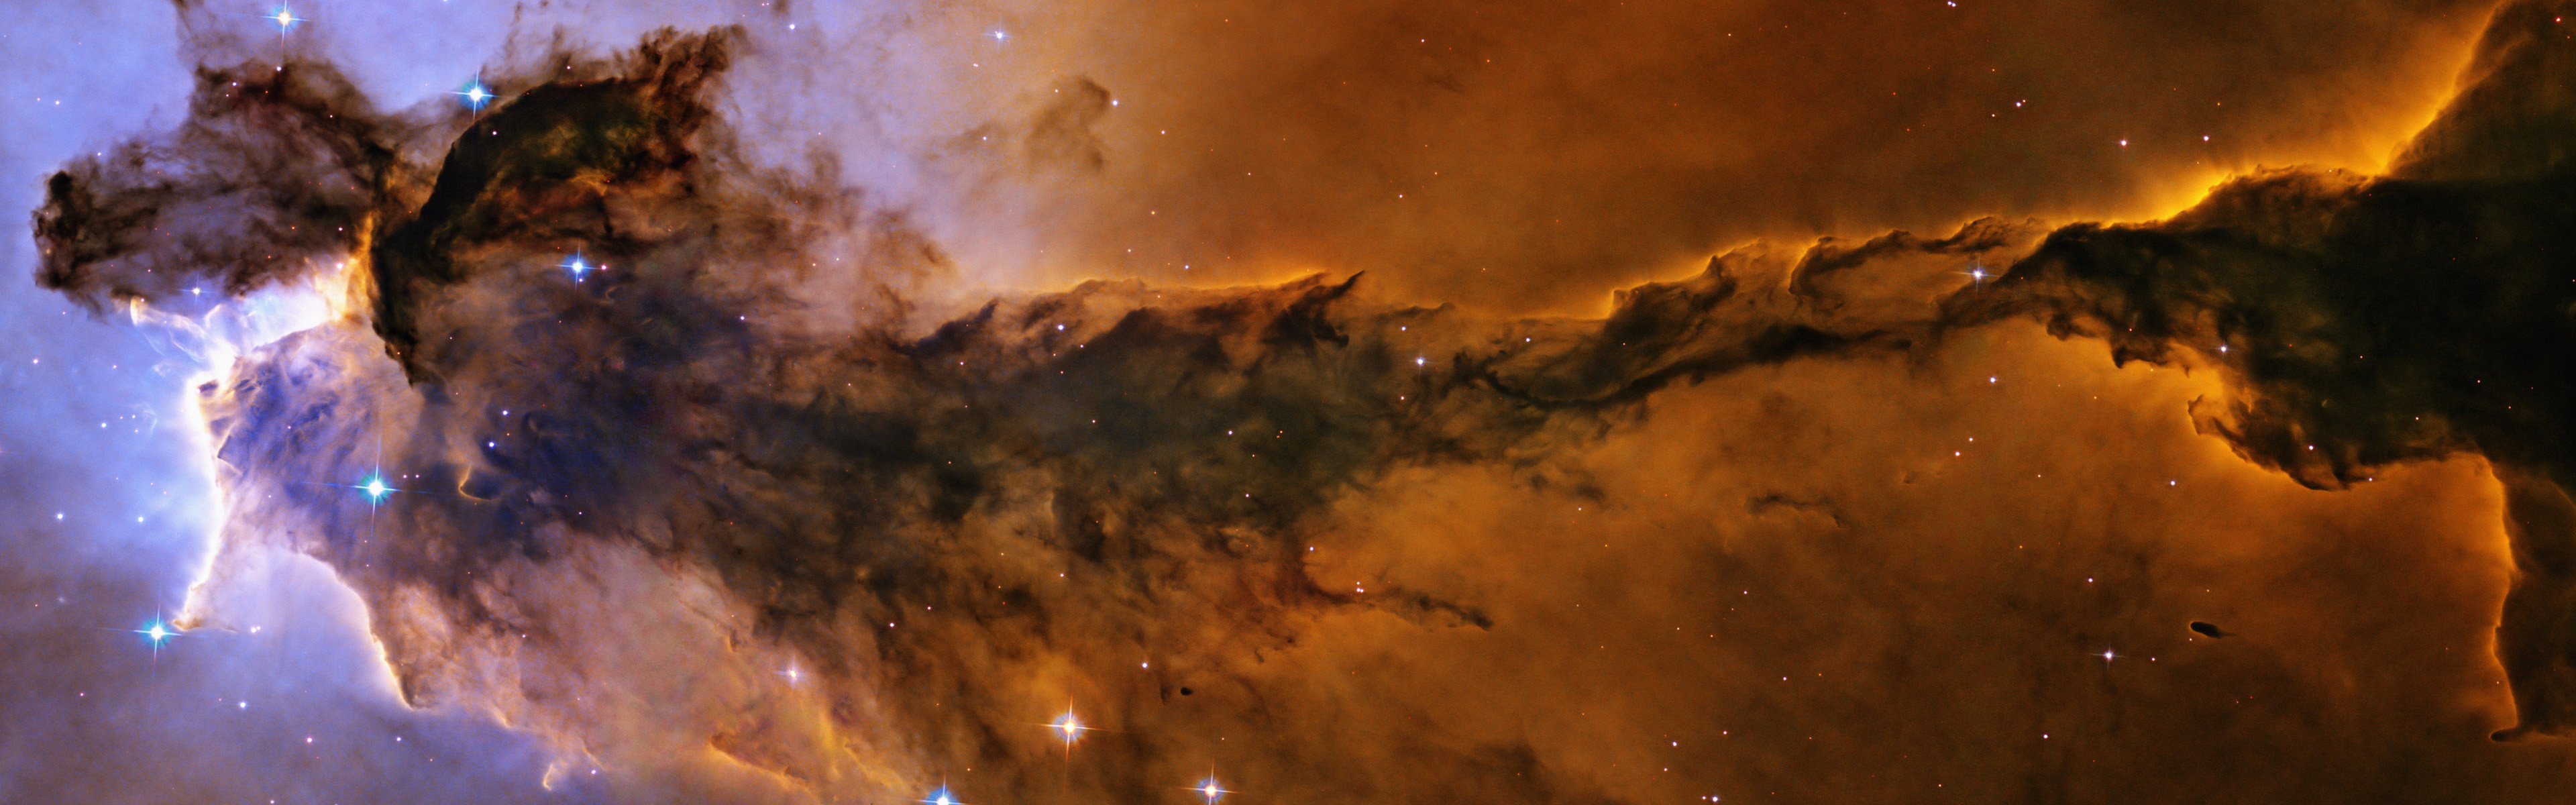 3840x1200 Billowing tower of cold gas and dust rising from the Eagle Nebula .